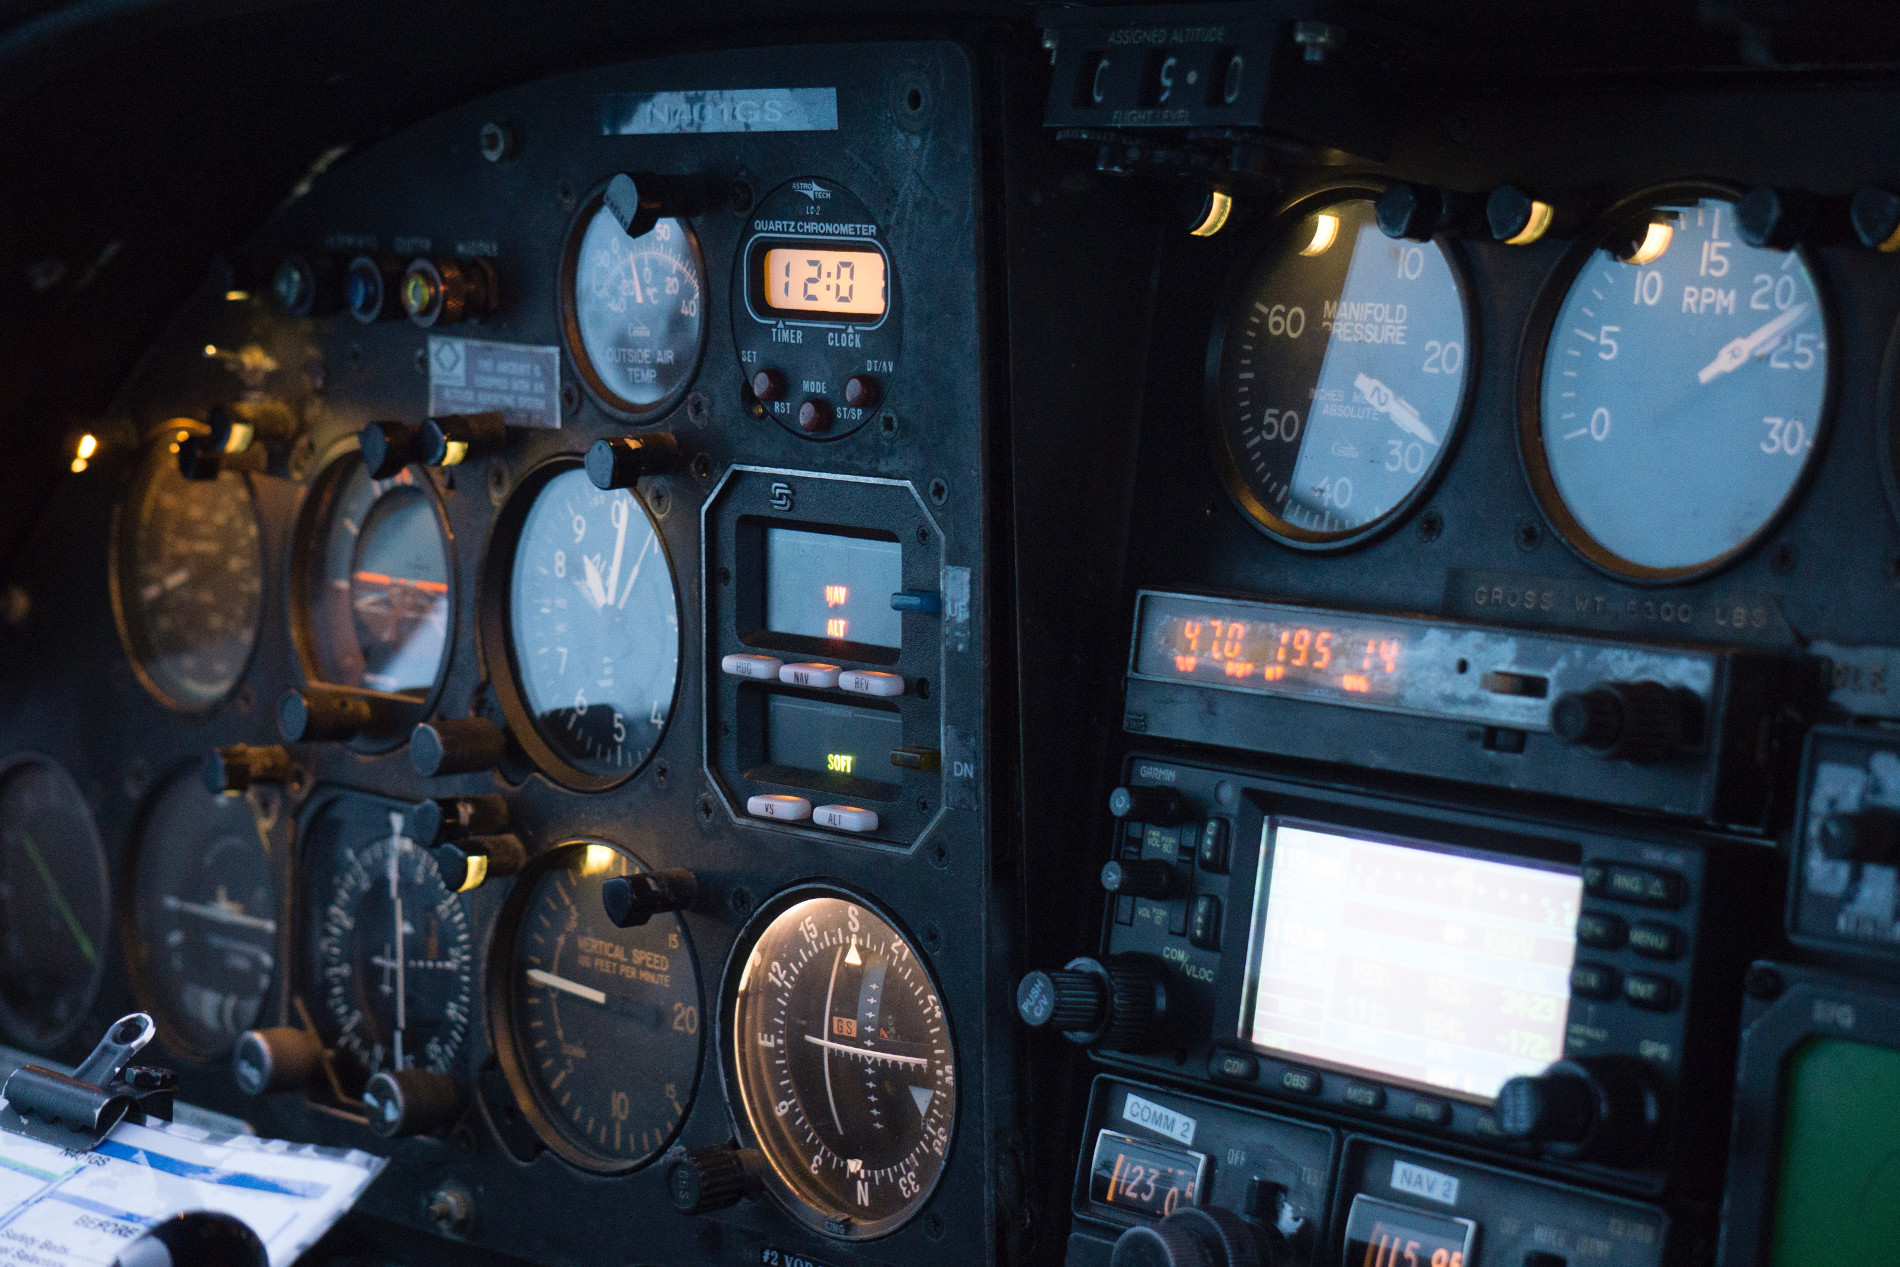 View of an instrument panel inside an aeroplane's cockpit